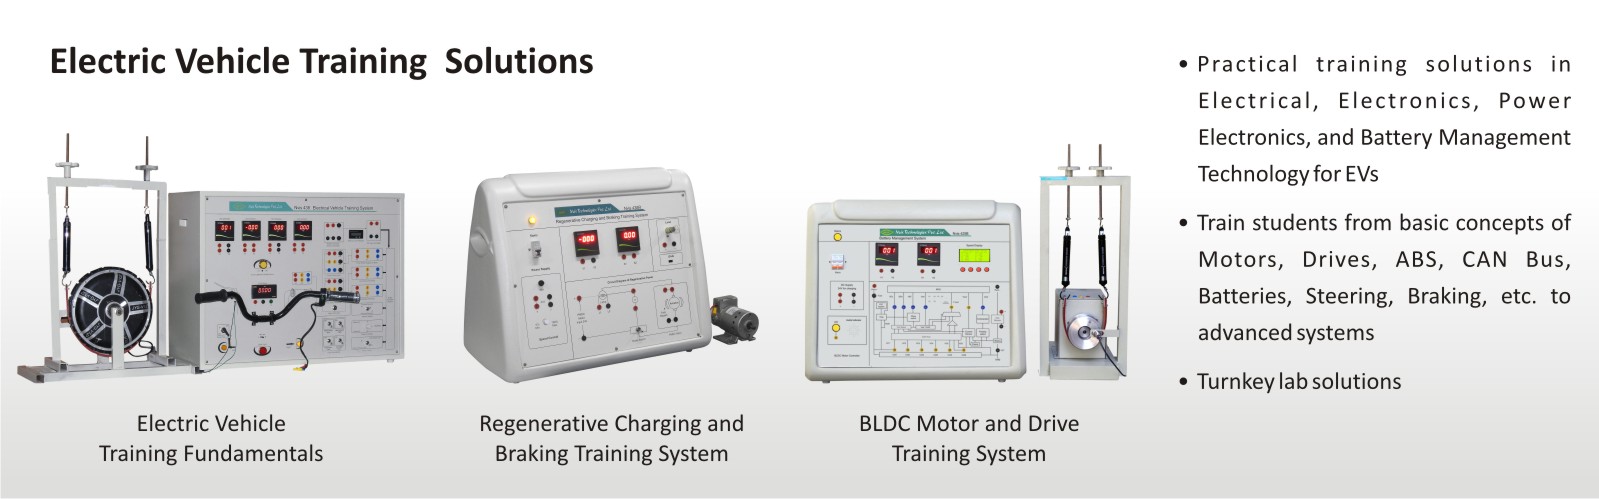 Electric Vehicle Training Solutions